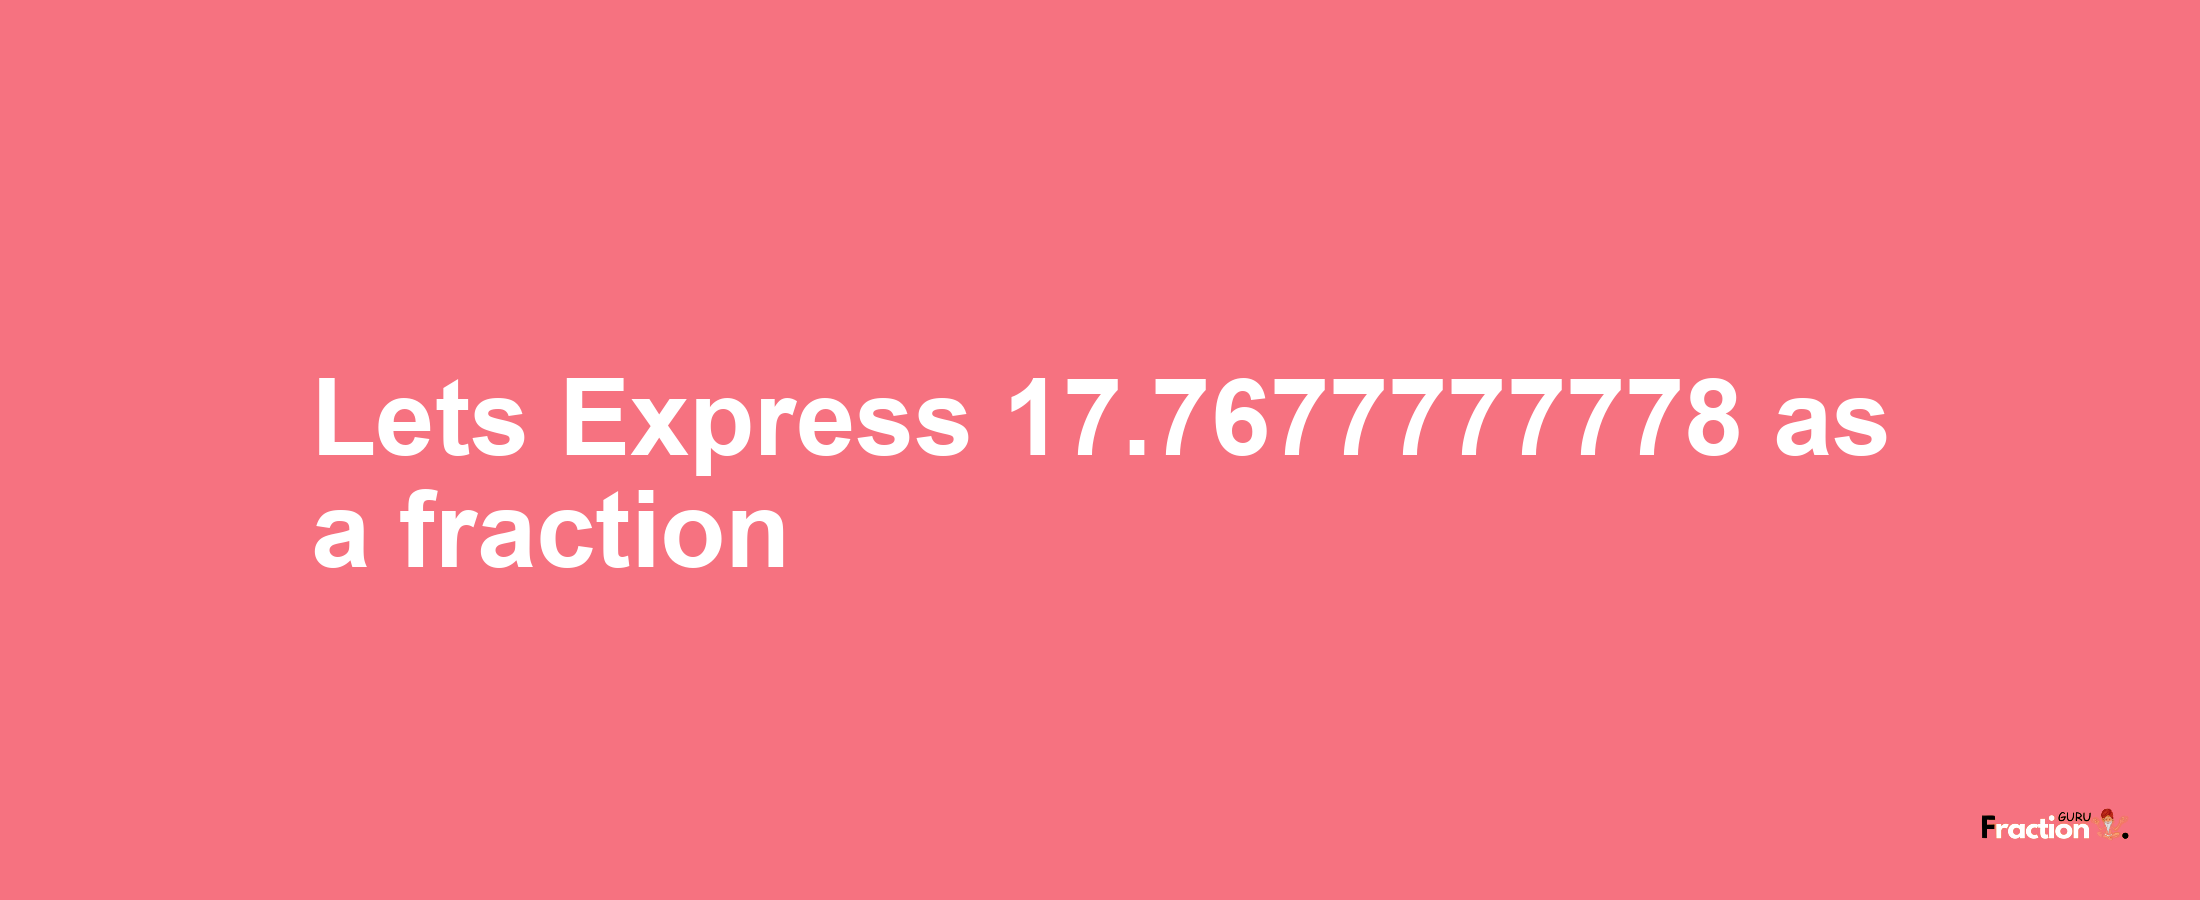 Lets Express 17.7677777778 as afraction